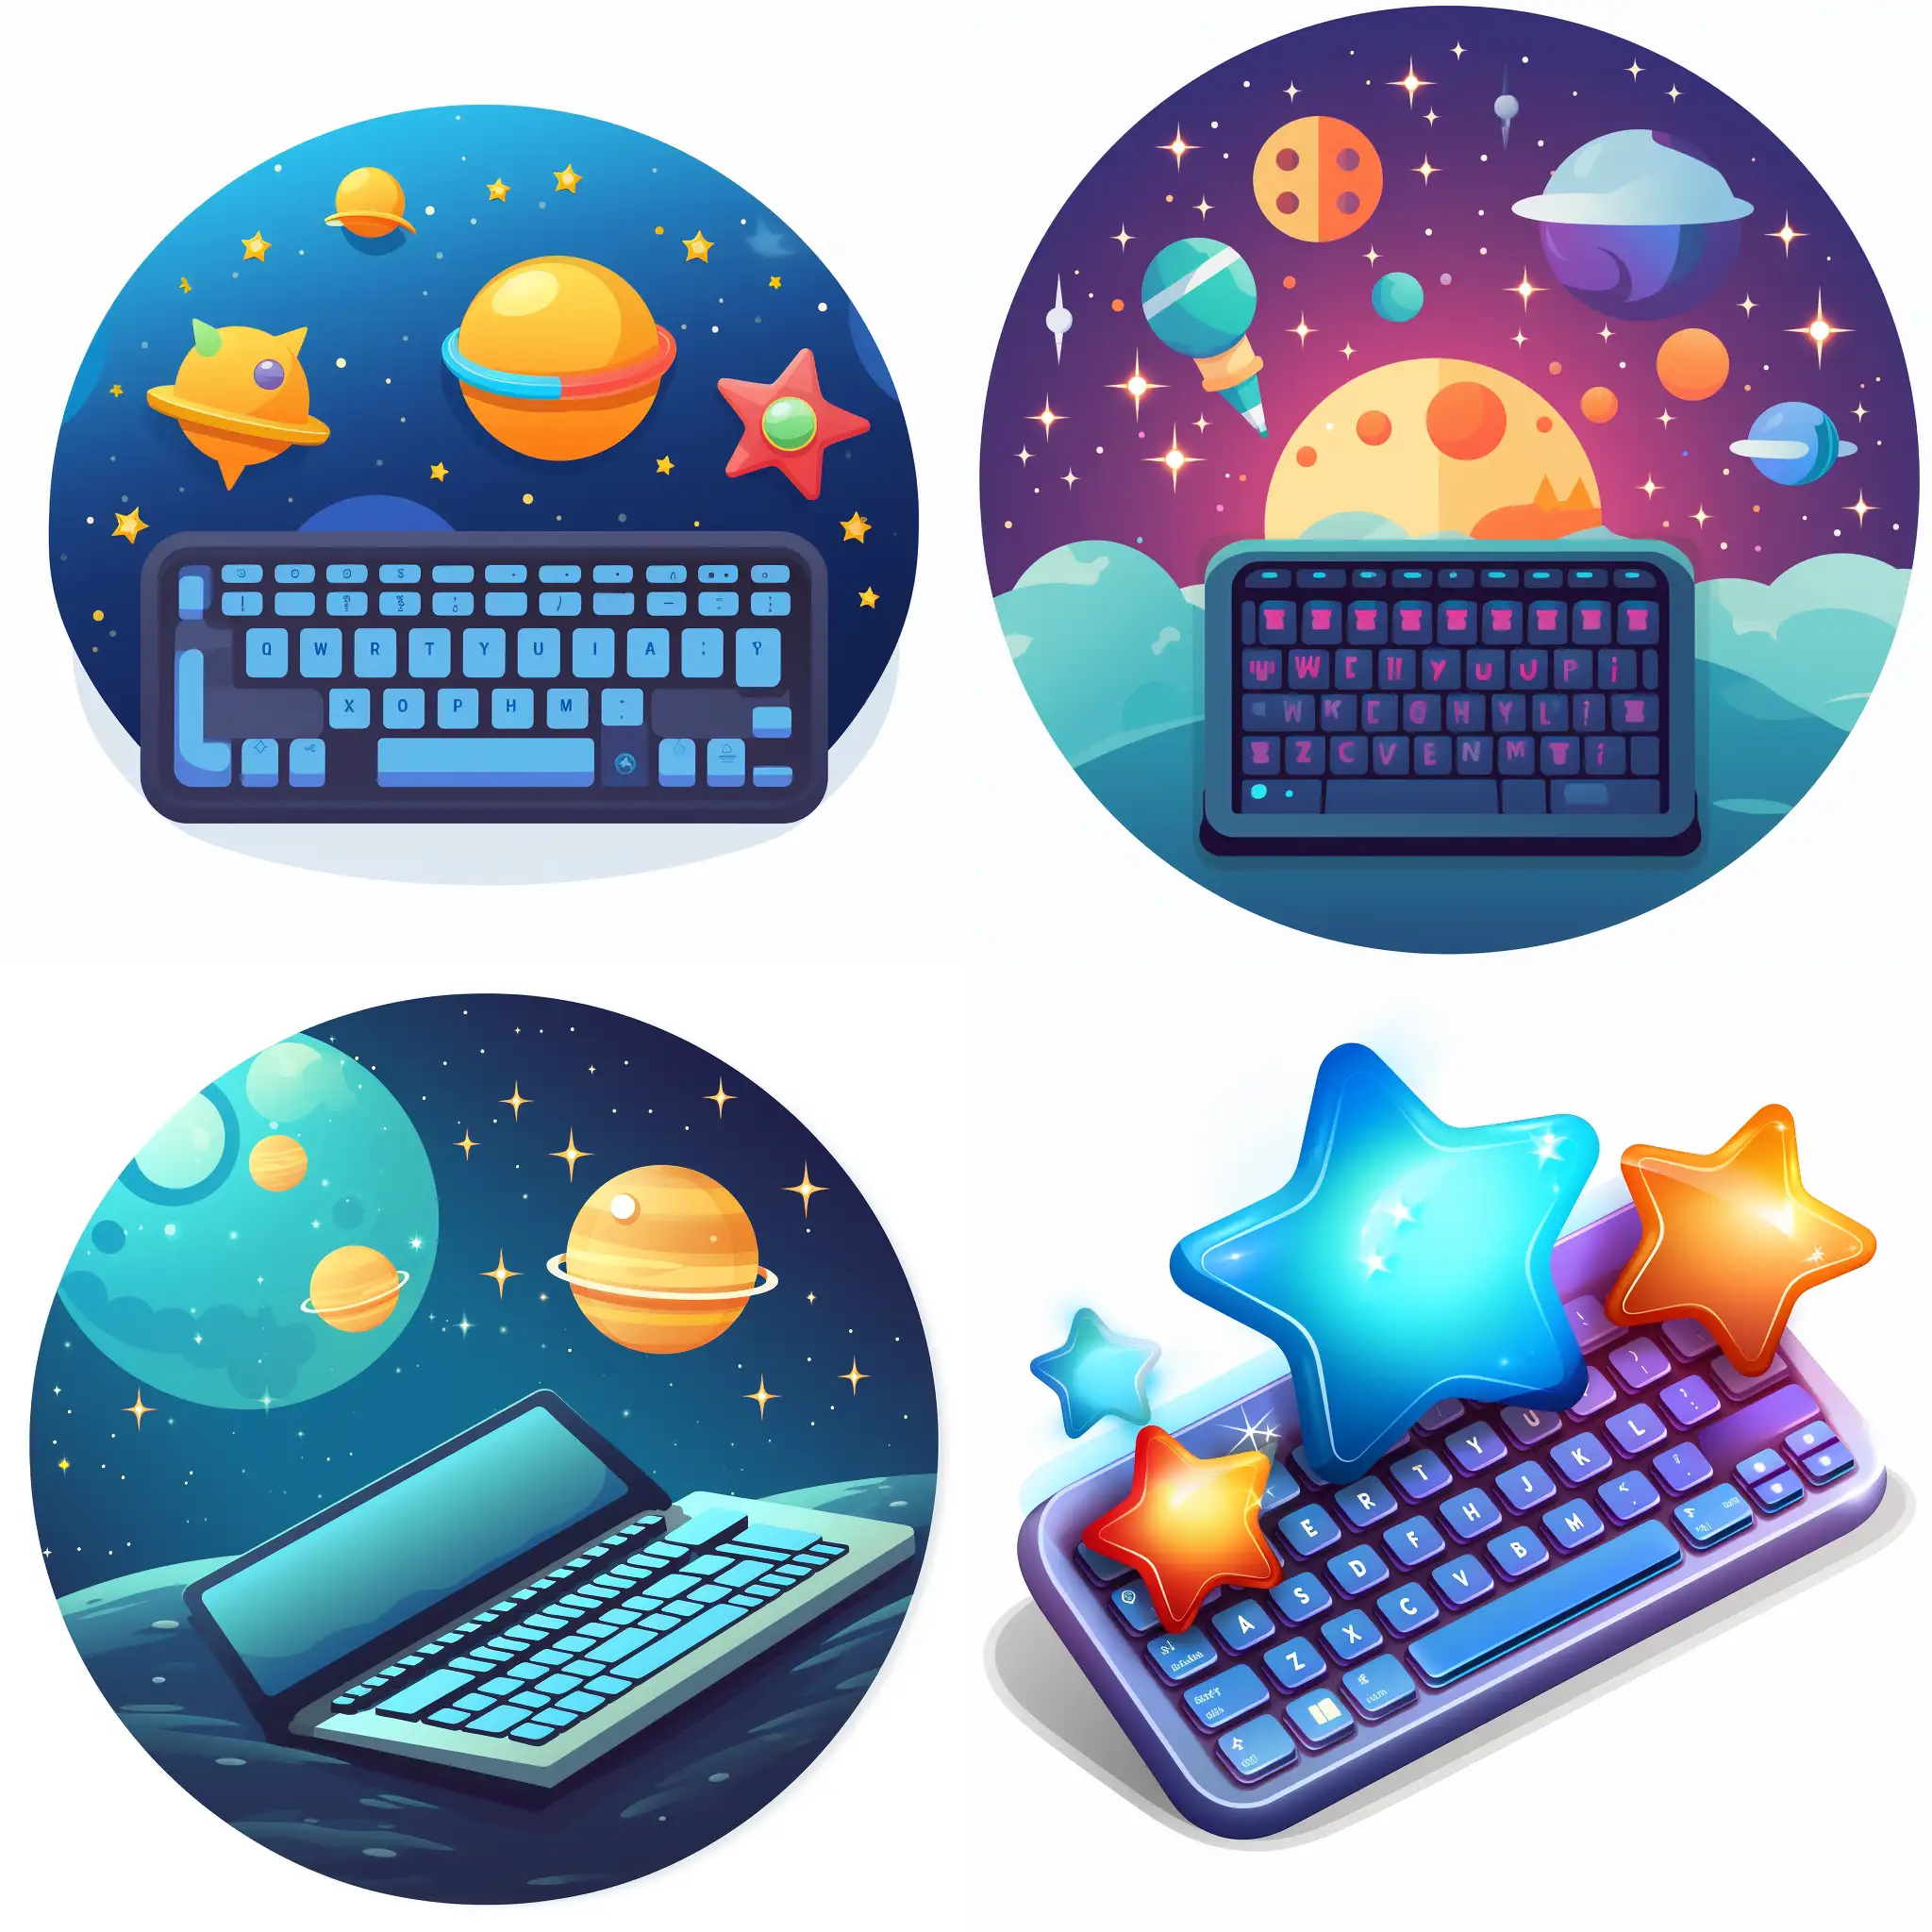 Celestial-Computer-Keyboard-Icon-with-Stars-and-Planets